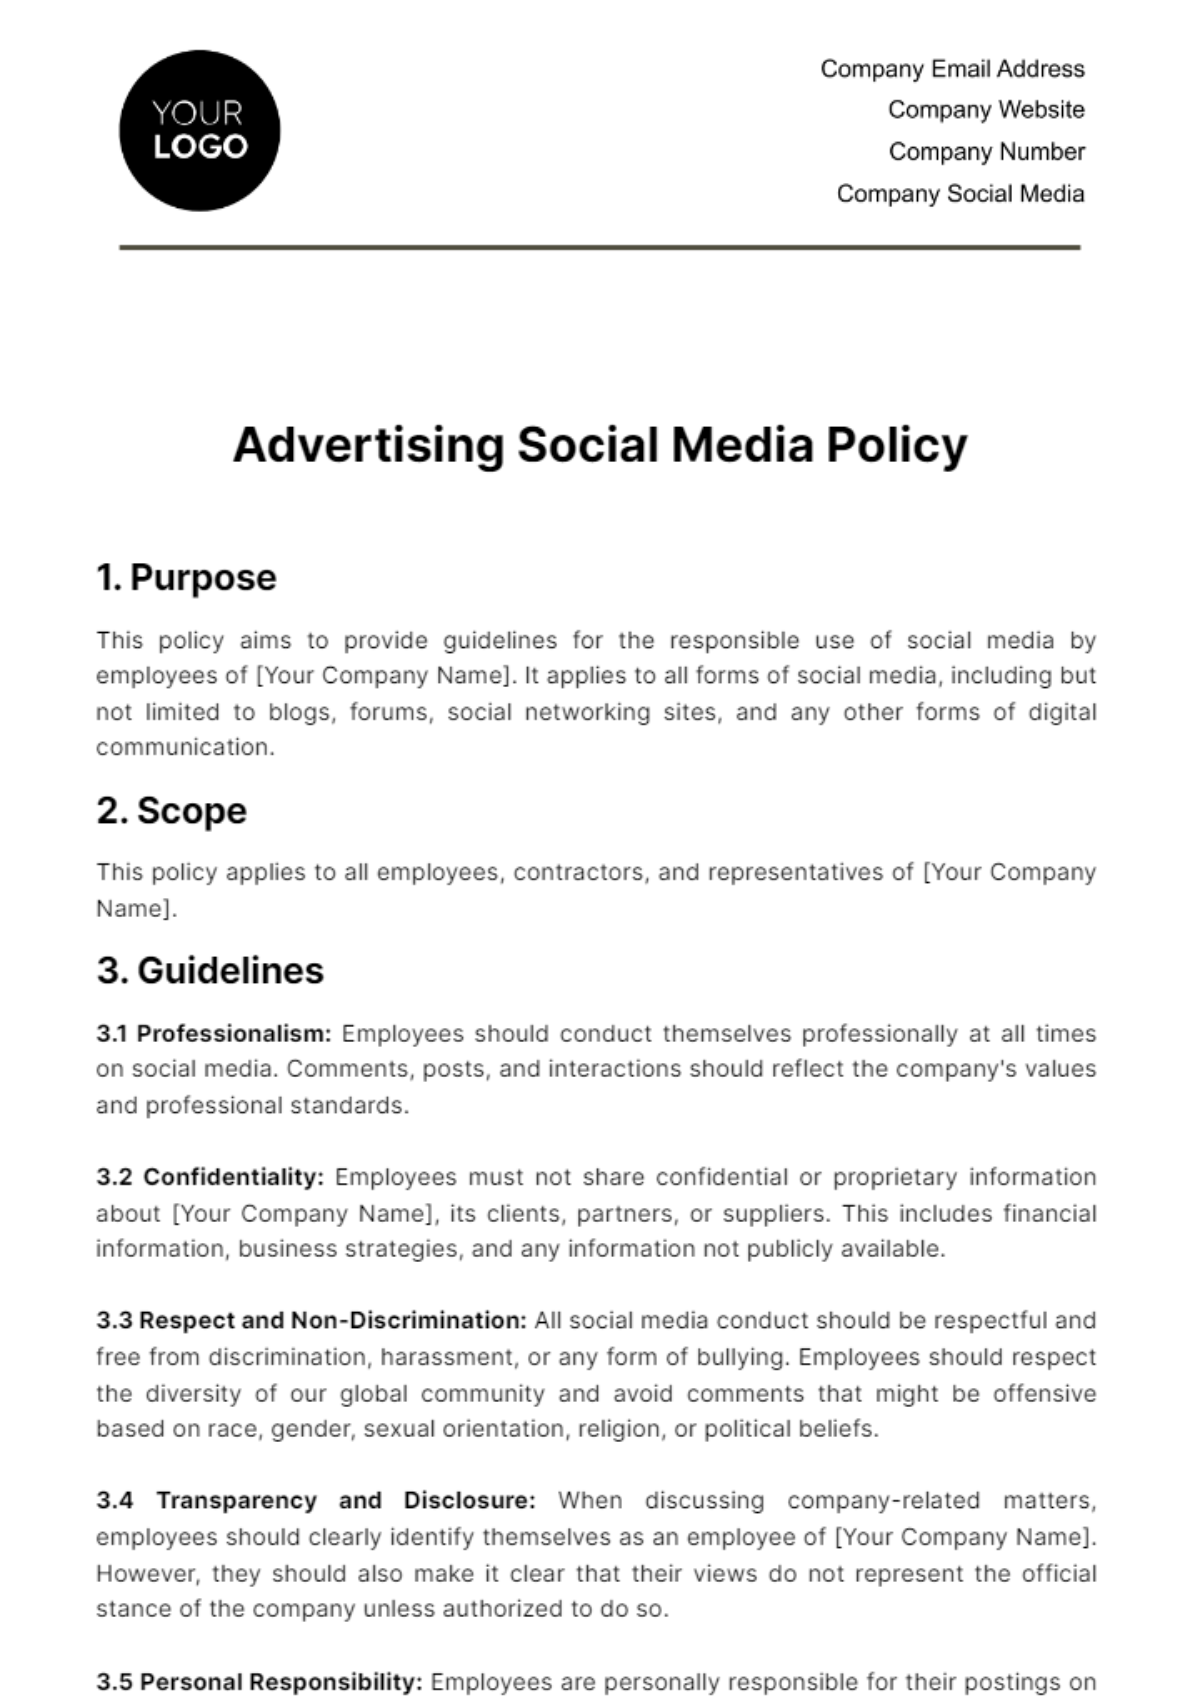 Advertising Social Media Policy Template